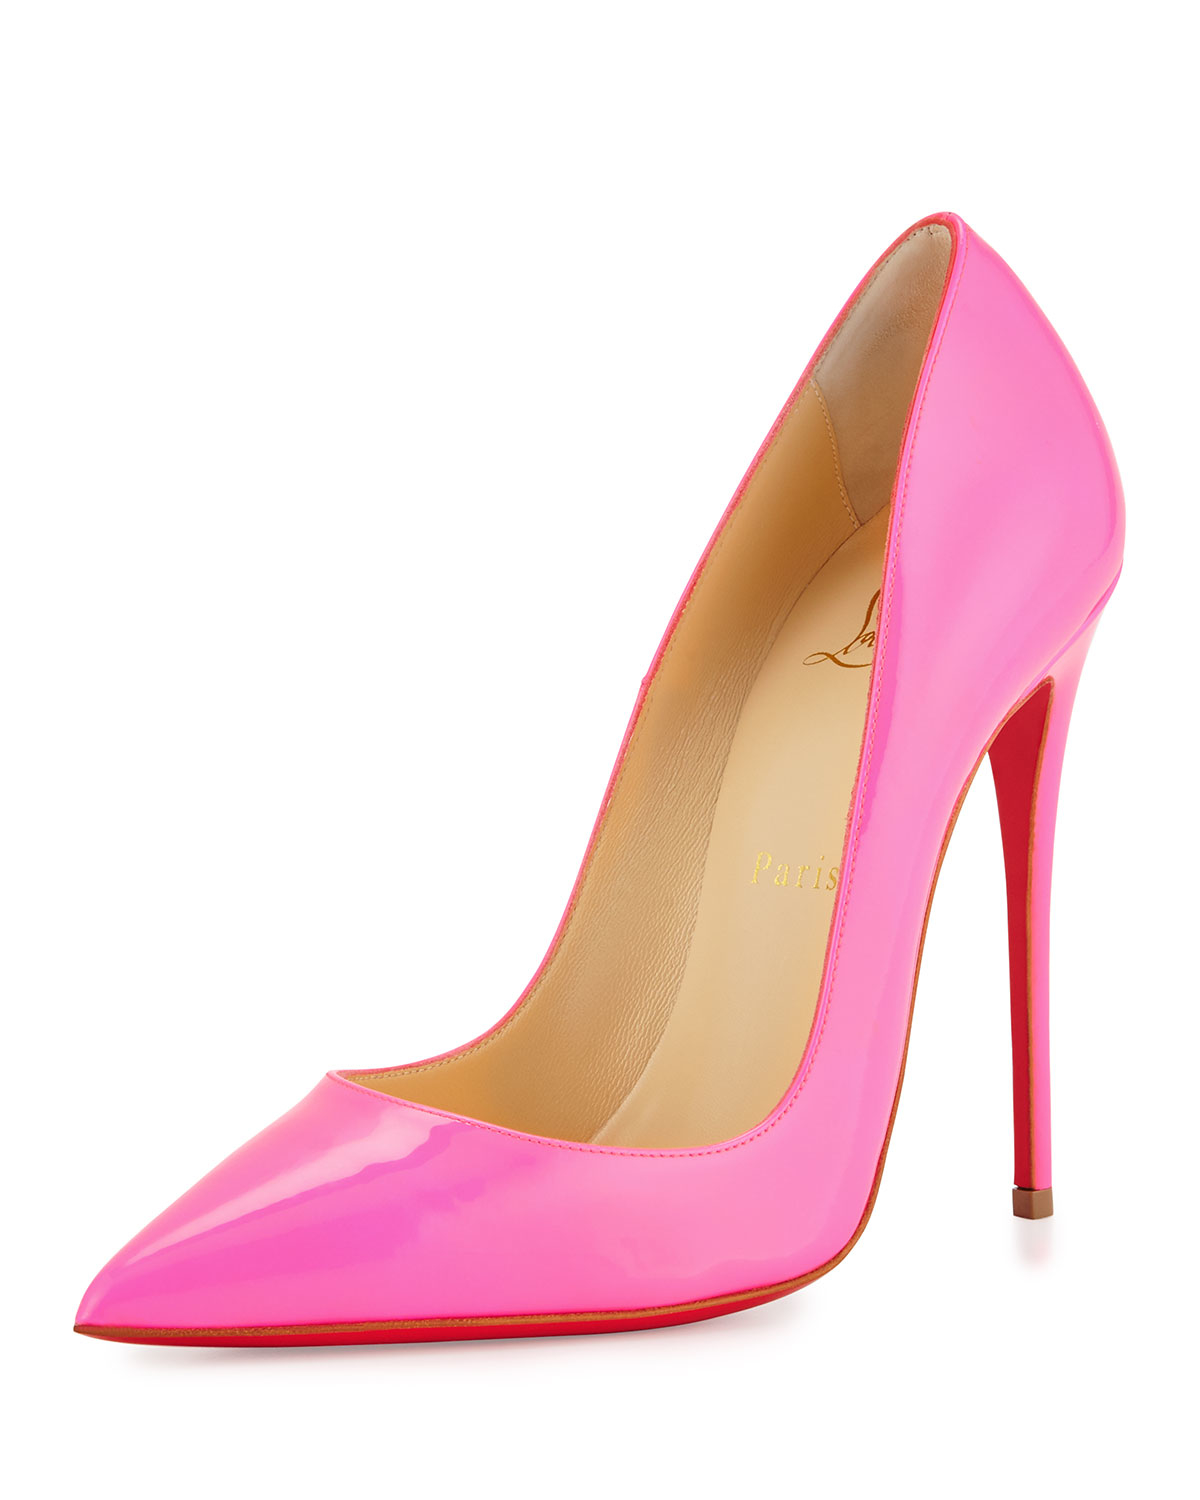 cheap christian louboutin loafers - christian louboutin sandals Neon pink patent leather cutouts | The ...